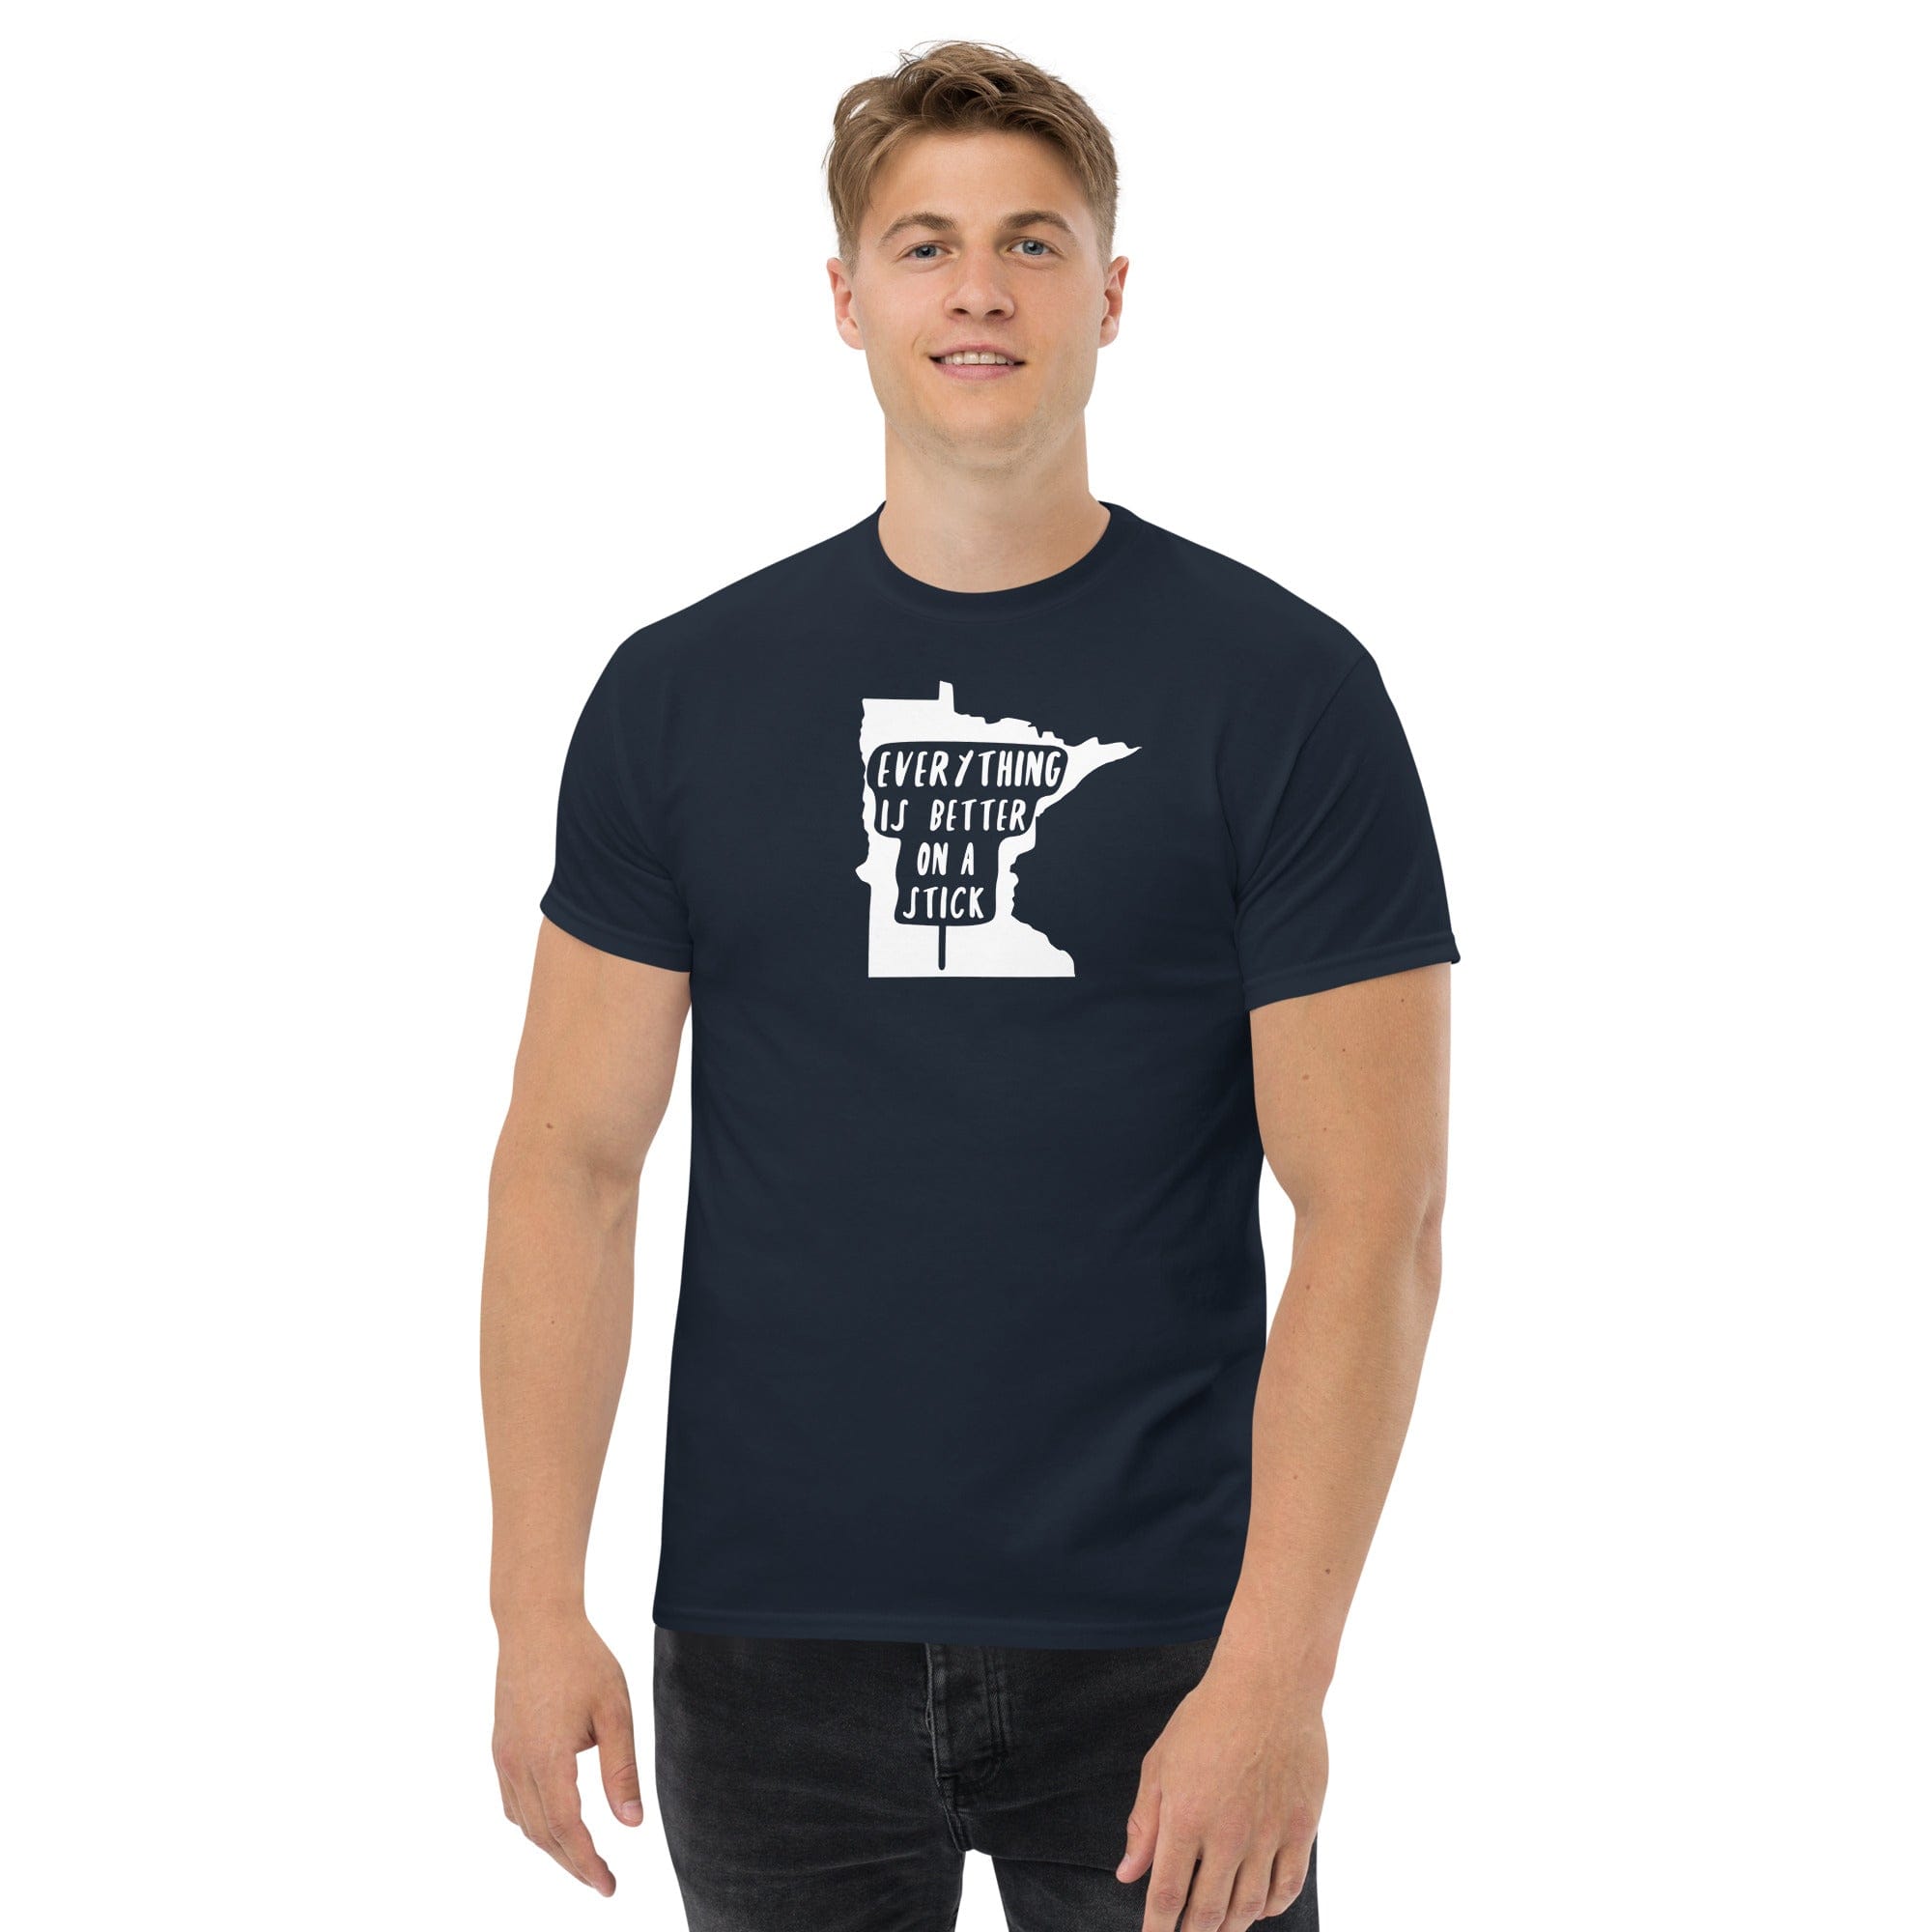 Minnesota State Fair "Everything Is Better on a Stick" Men's Classic Tee ThatMNLife Navy / S Minnesota Custom T-Shirts and Gifts